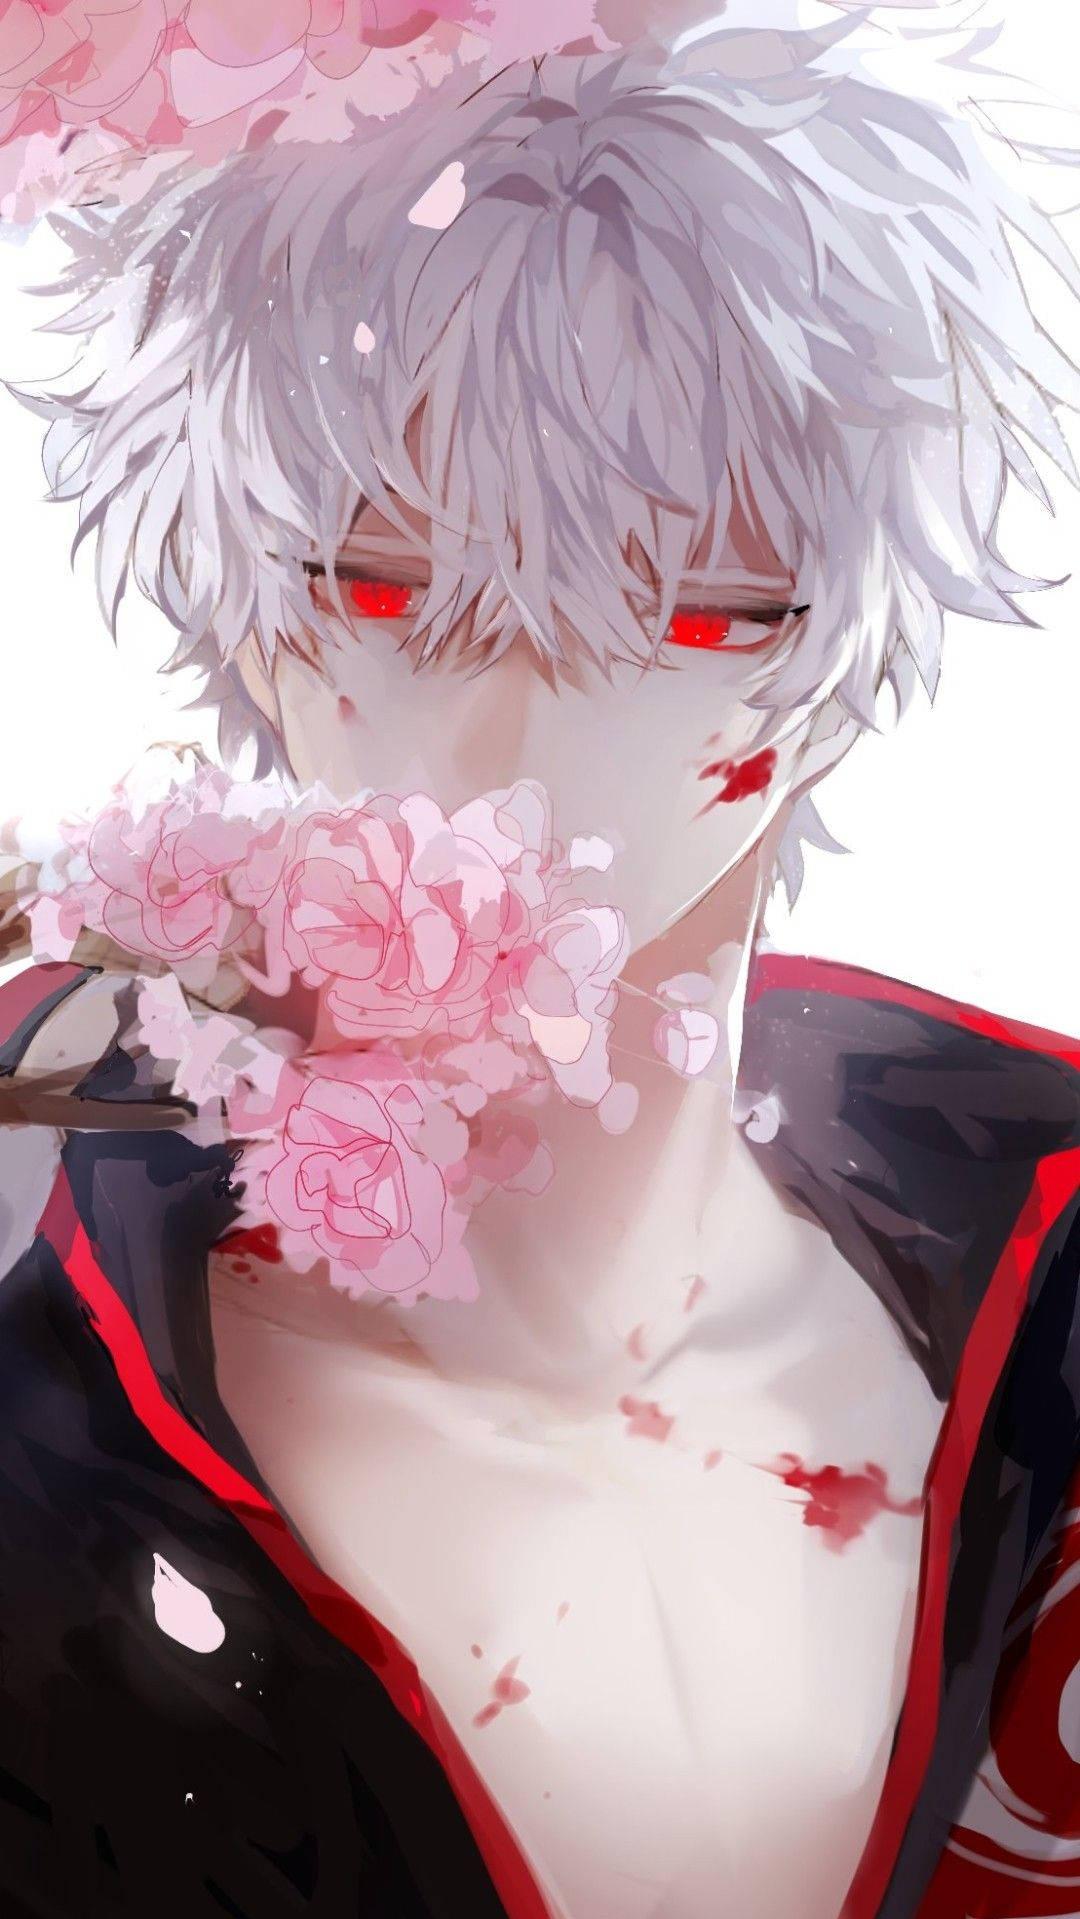 Download Red eyed Aesthetic Anime Boy Wallpaper